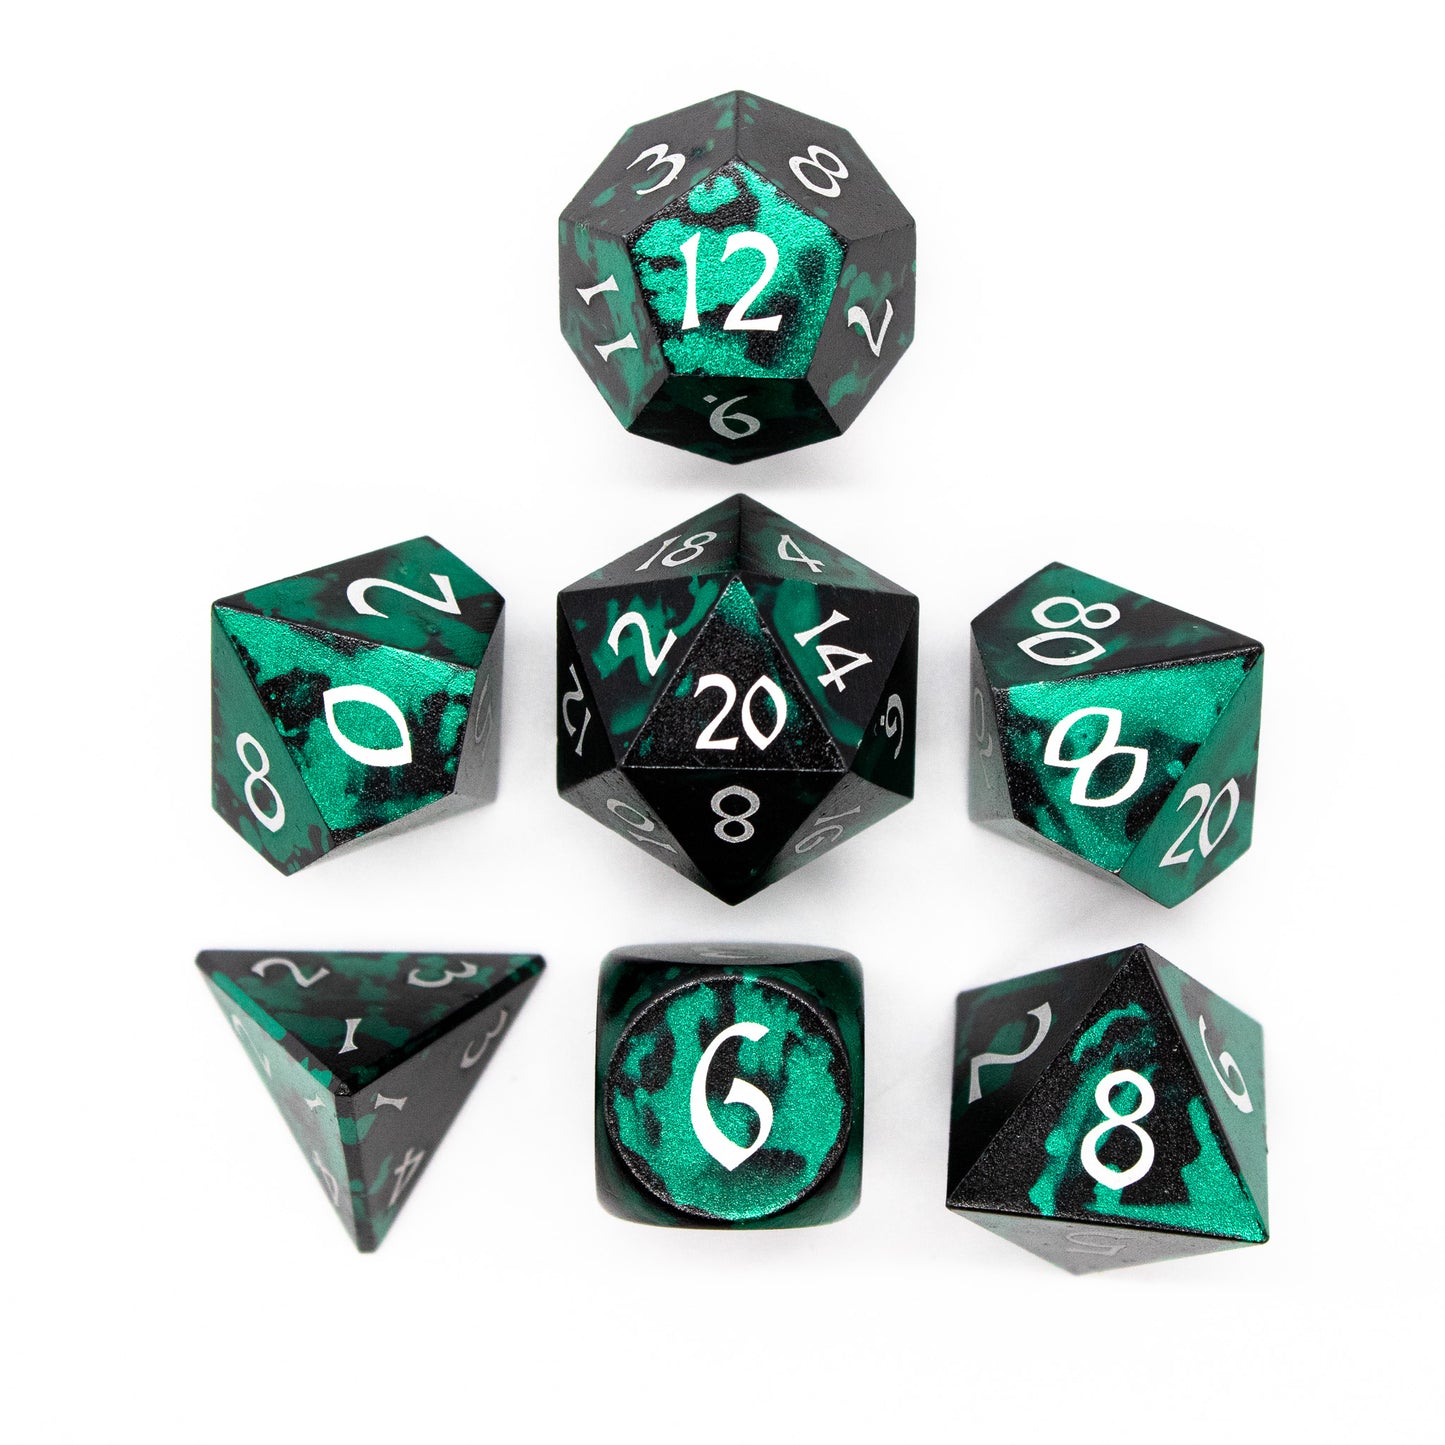 Anodized Aluminum - Teal and Black